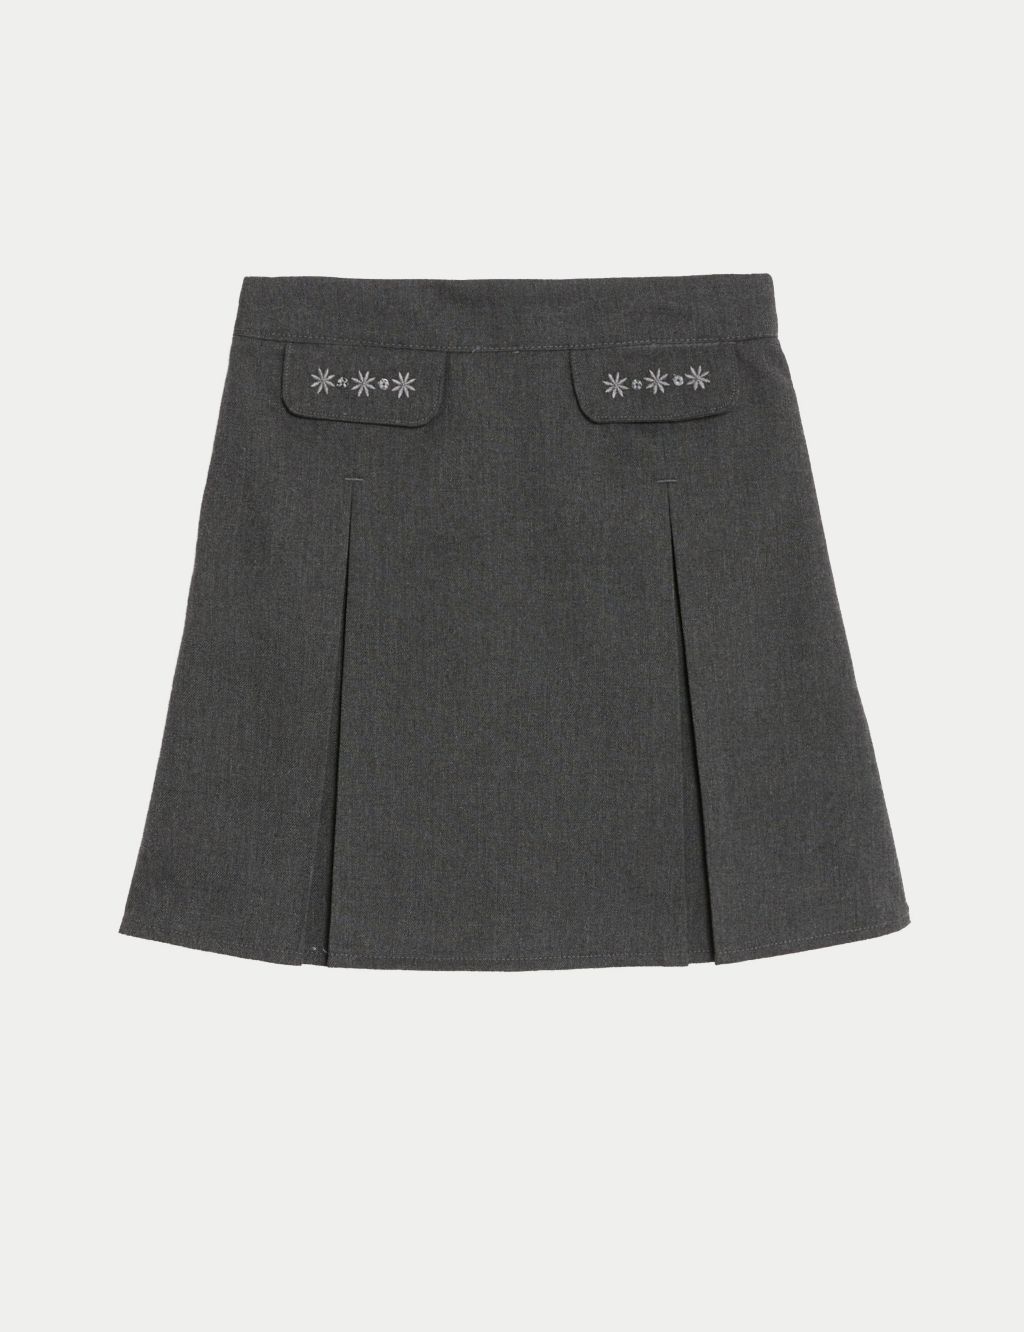 Girls' Embroided School Skirt (2-18 Yrs) image 2